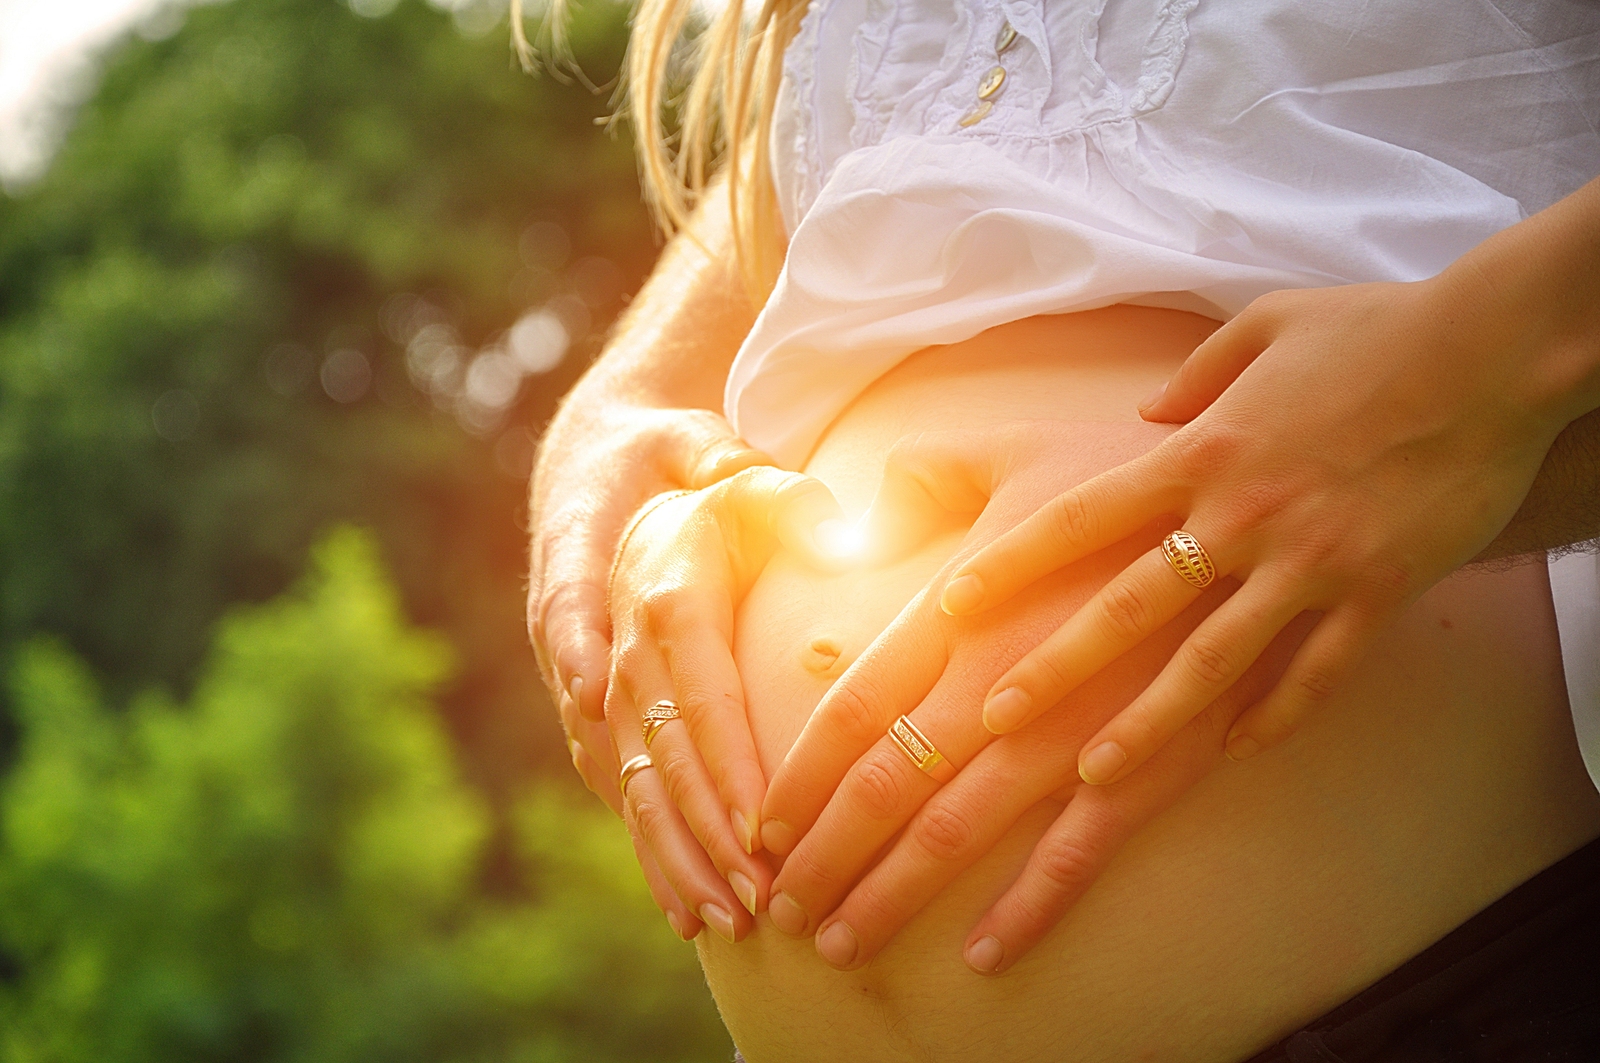 Pregnant Woman Holding Hand On Her Baby Bump